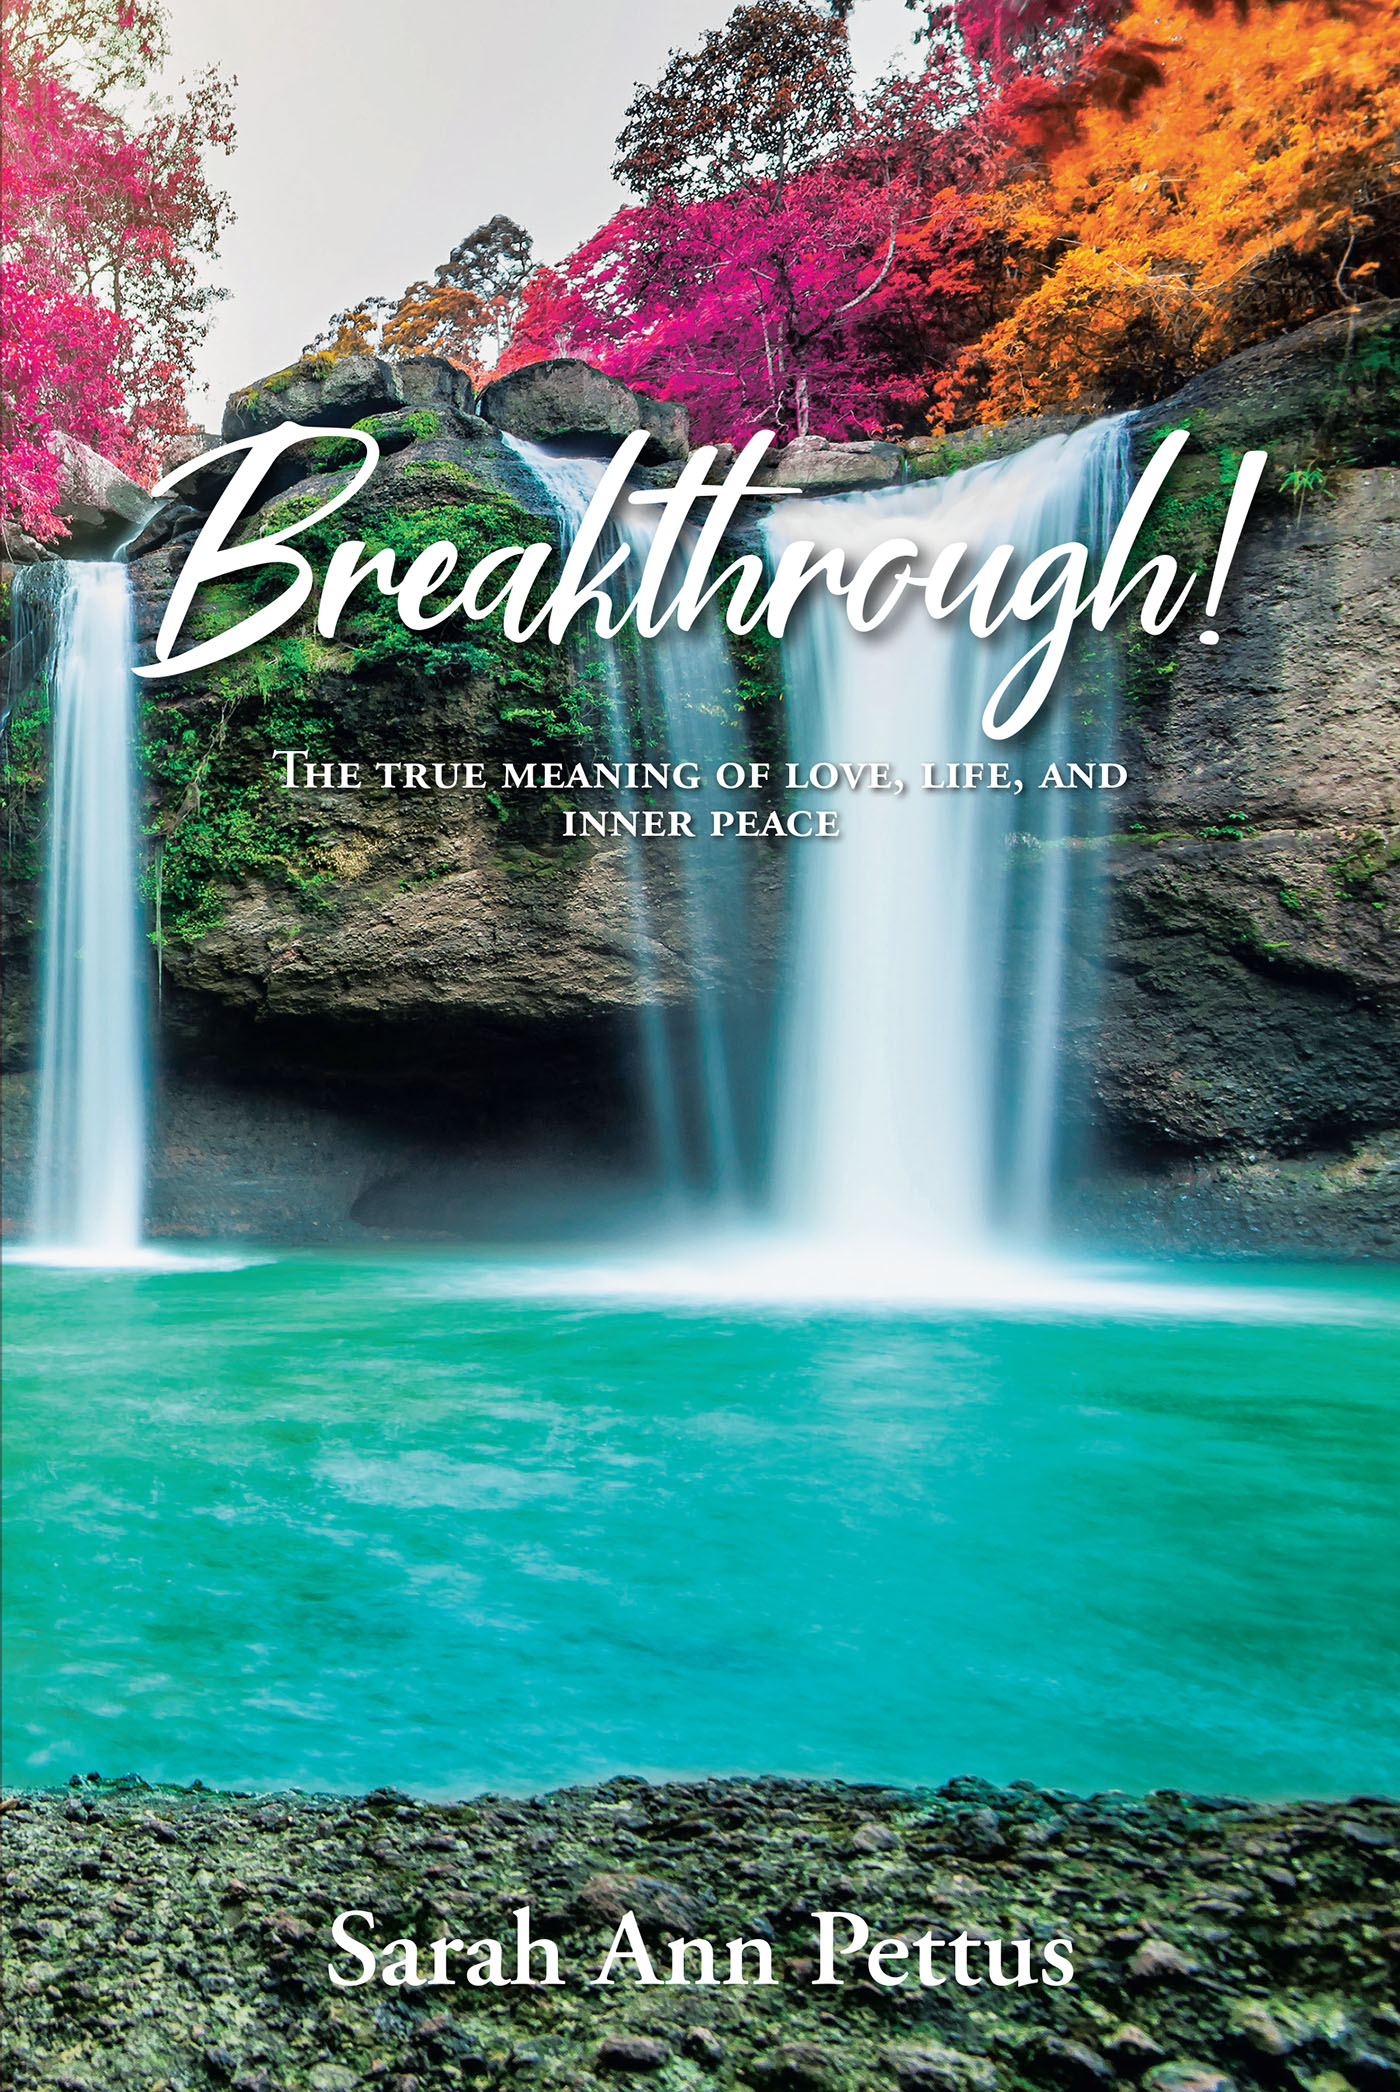 Sarah Ann Pettus’s Newly Released "Breakthrough! The True Meaning of Love, Life, and Inner Peace" is a Thoughtful Arrangement of Heartfelt Poetry